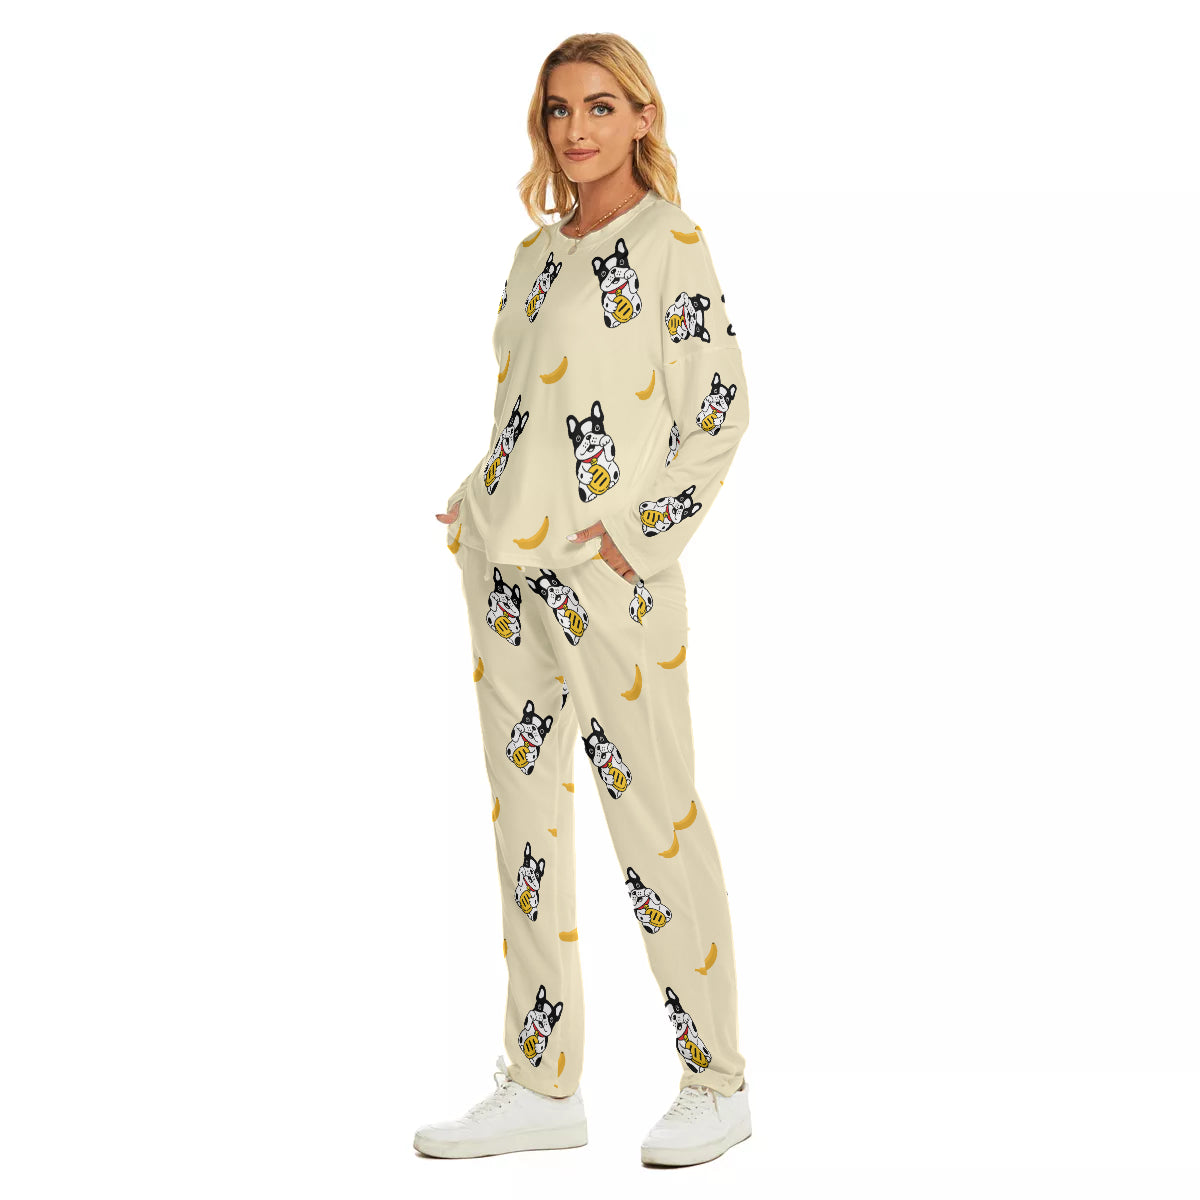 LILY - Women's Home Service Suit - Frenchie Bulldog Shop